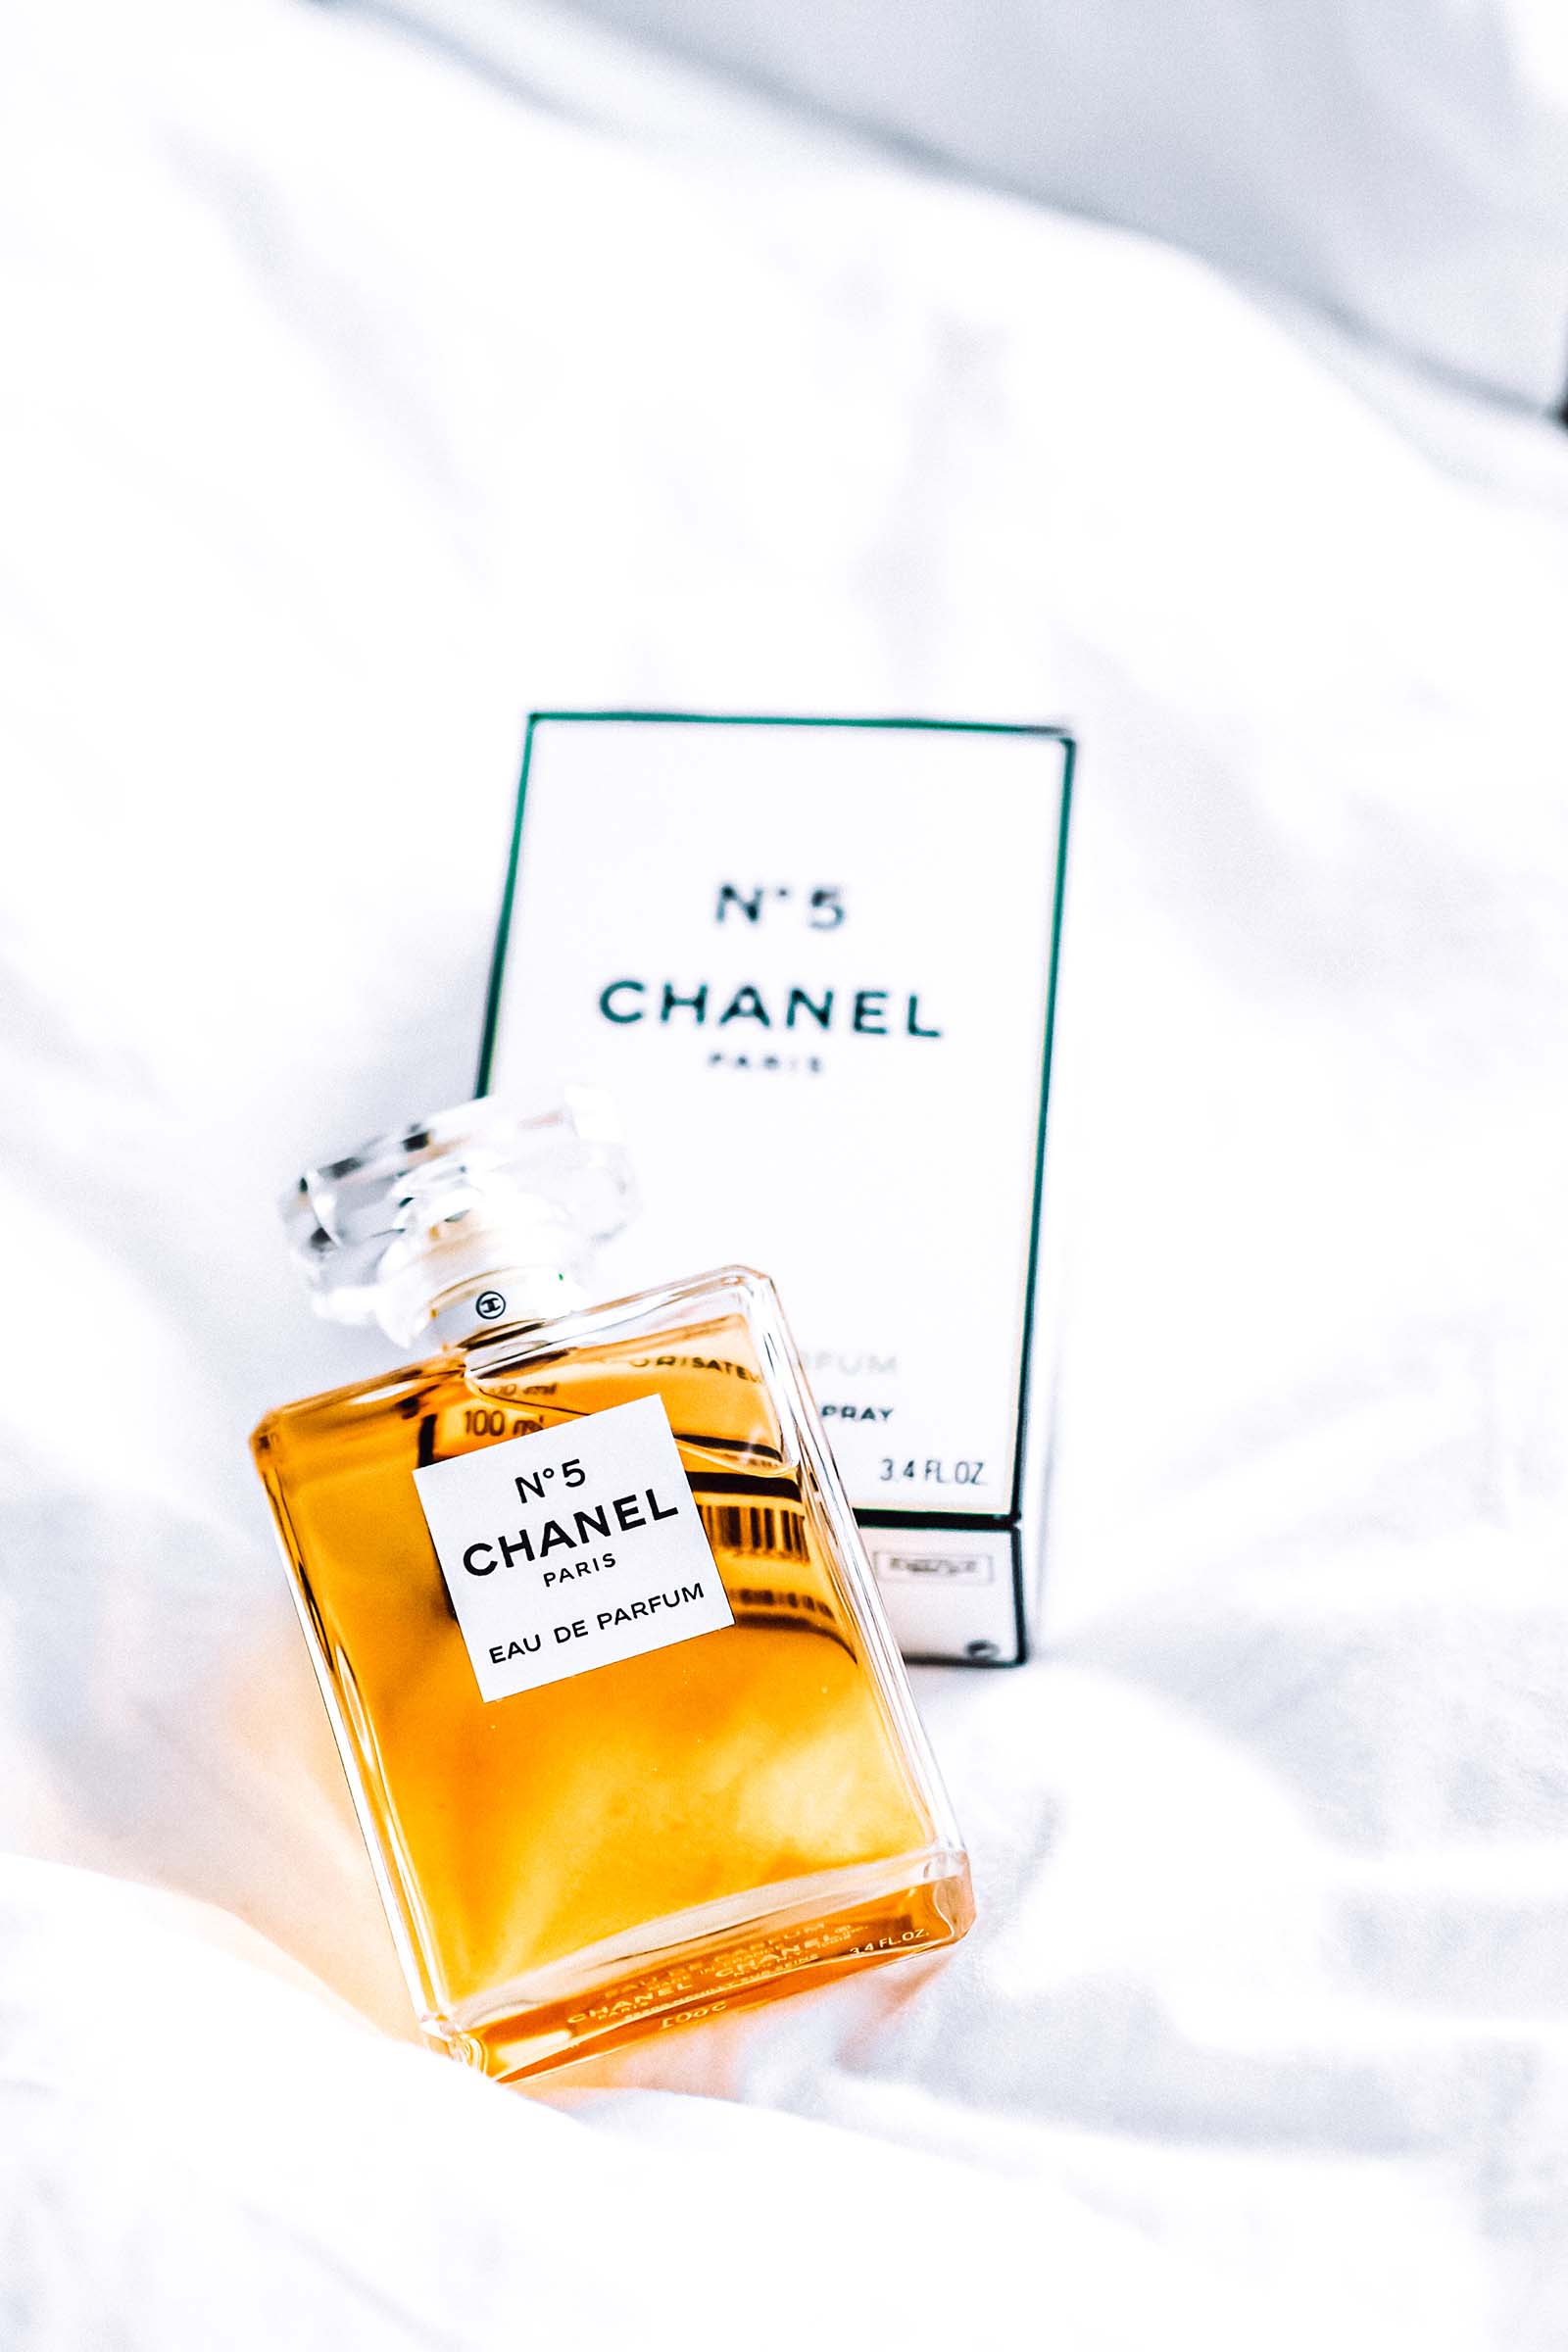 12 startling secrets you still don't know about Chanel No. 5 (even after 100  years!)